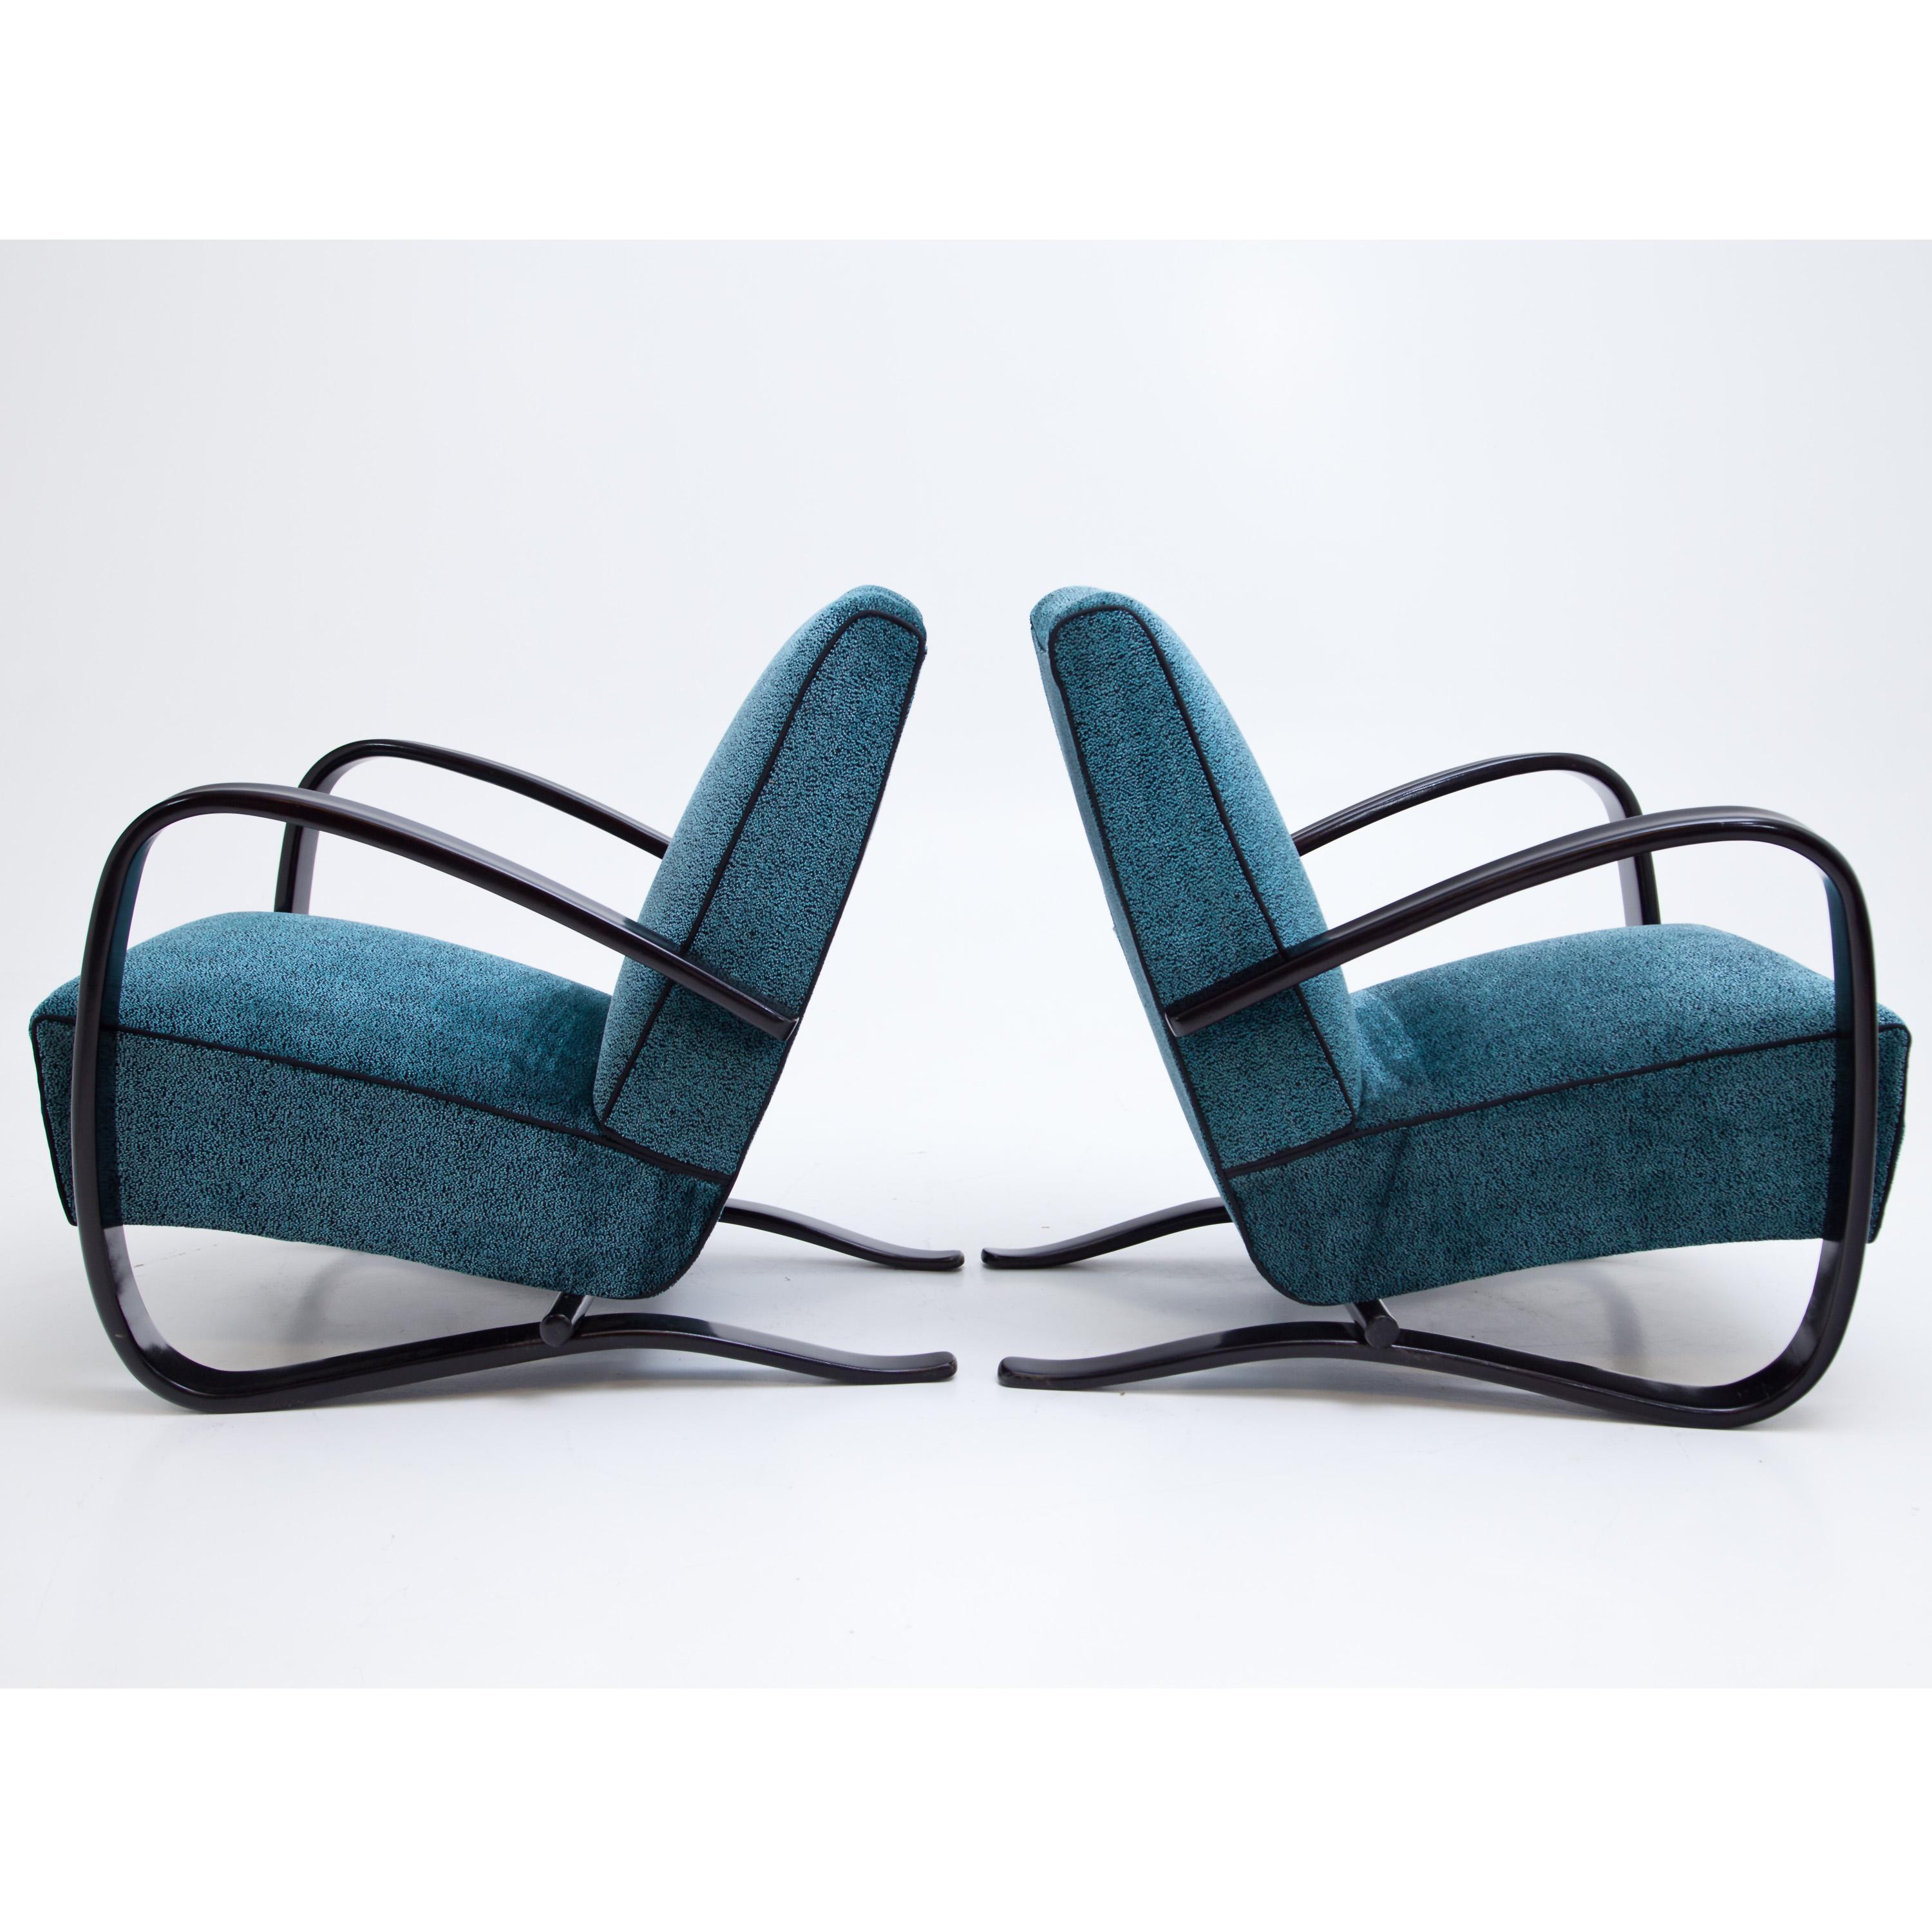 Pair of Halabala armchairs with blue and black upholstery. The dark stained armrests run in an elegant C-shaped curve around the side of the seat cushion and become the supporting frame. The chairs have been reupholstered with a high-quality fabric,